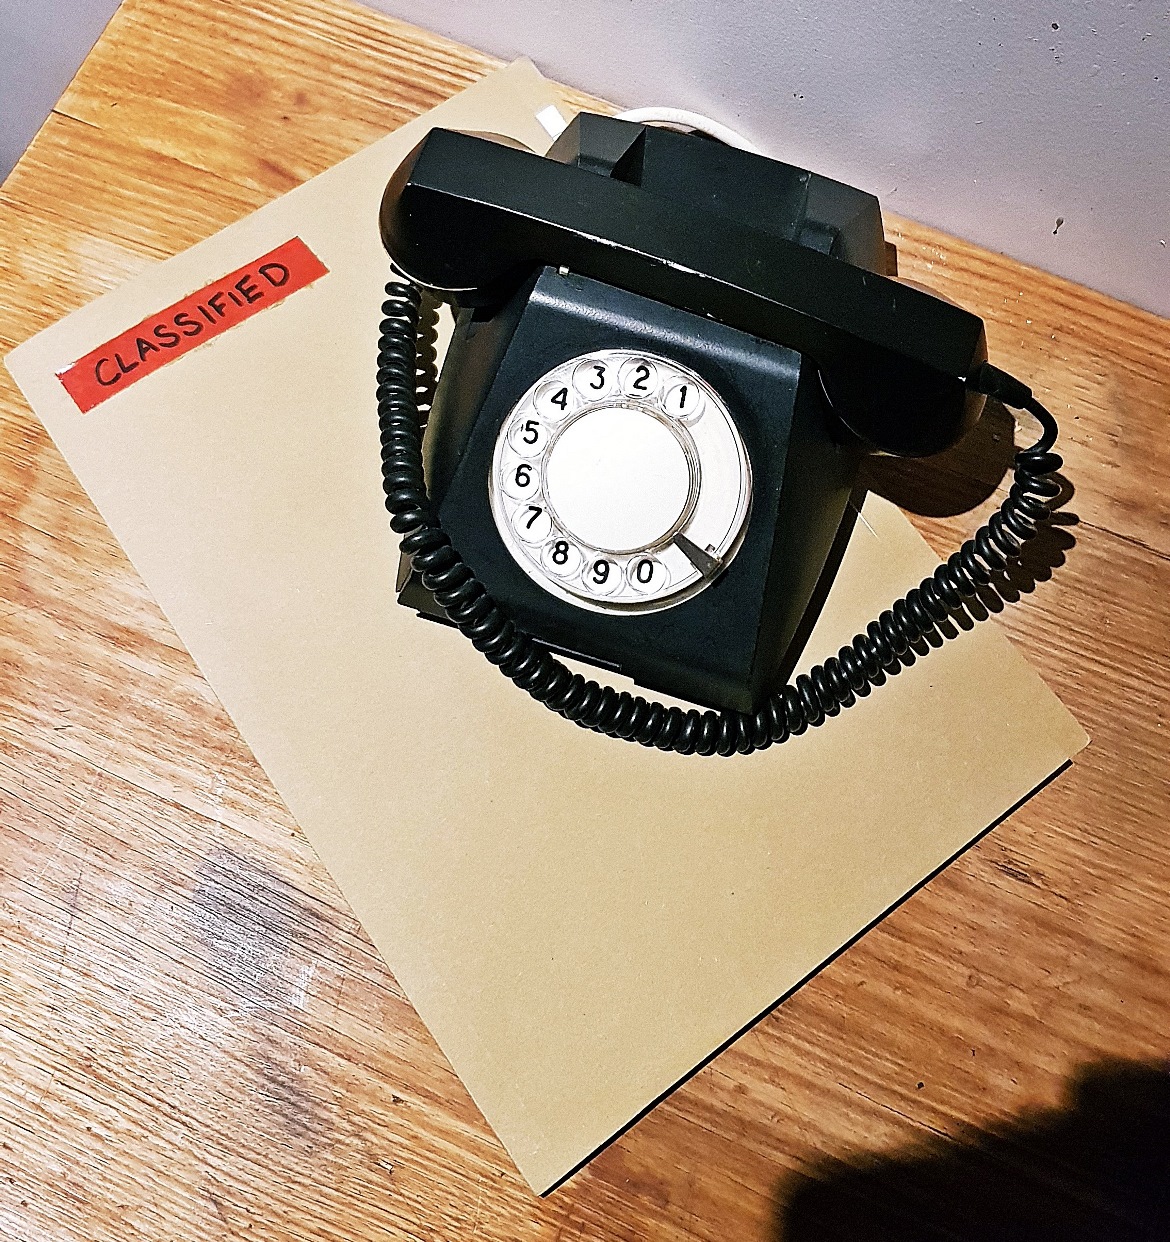 Phone and a confidential folder - Our Finest Hour, escape room by Escape Hunt Leeds, review by BeckyBecky Blogs